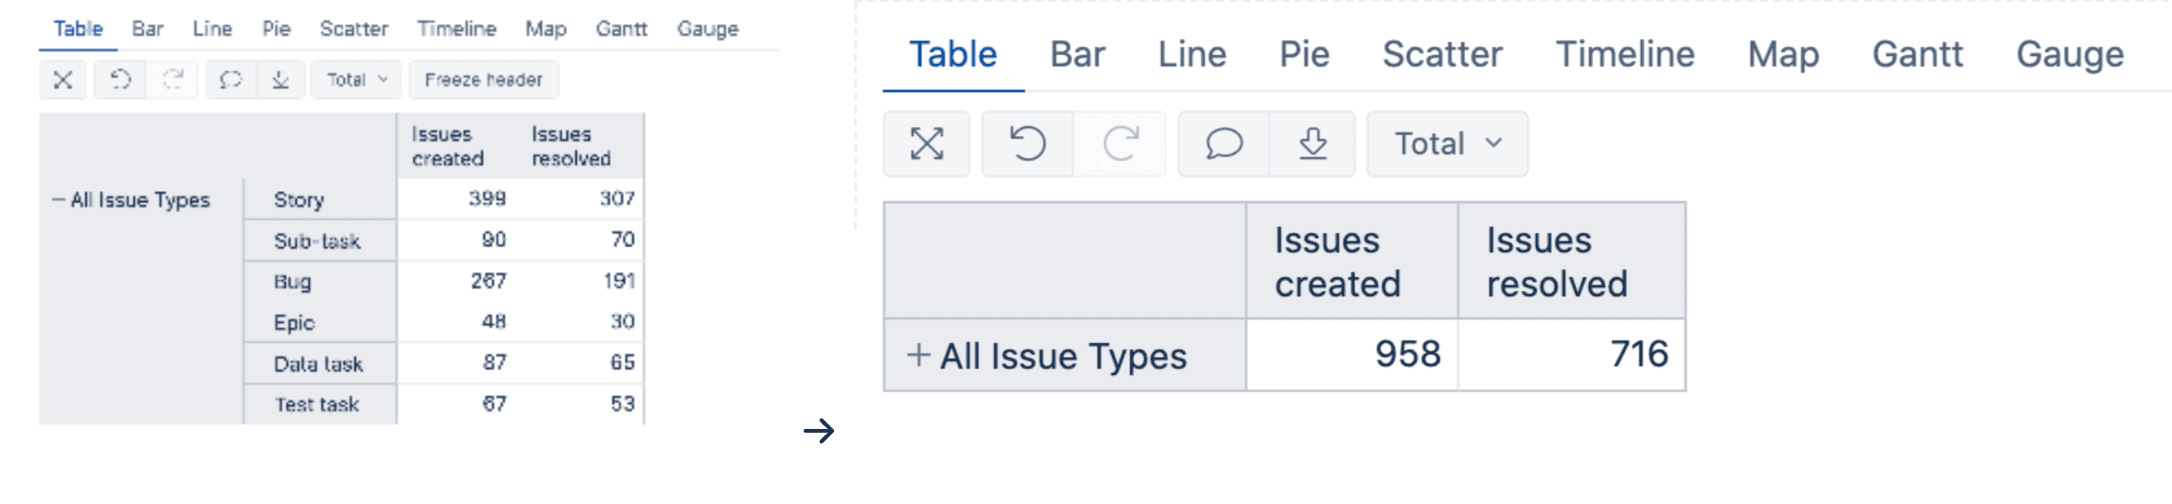 issue types table in eazybi for Jira 